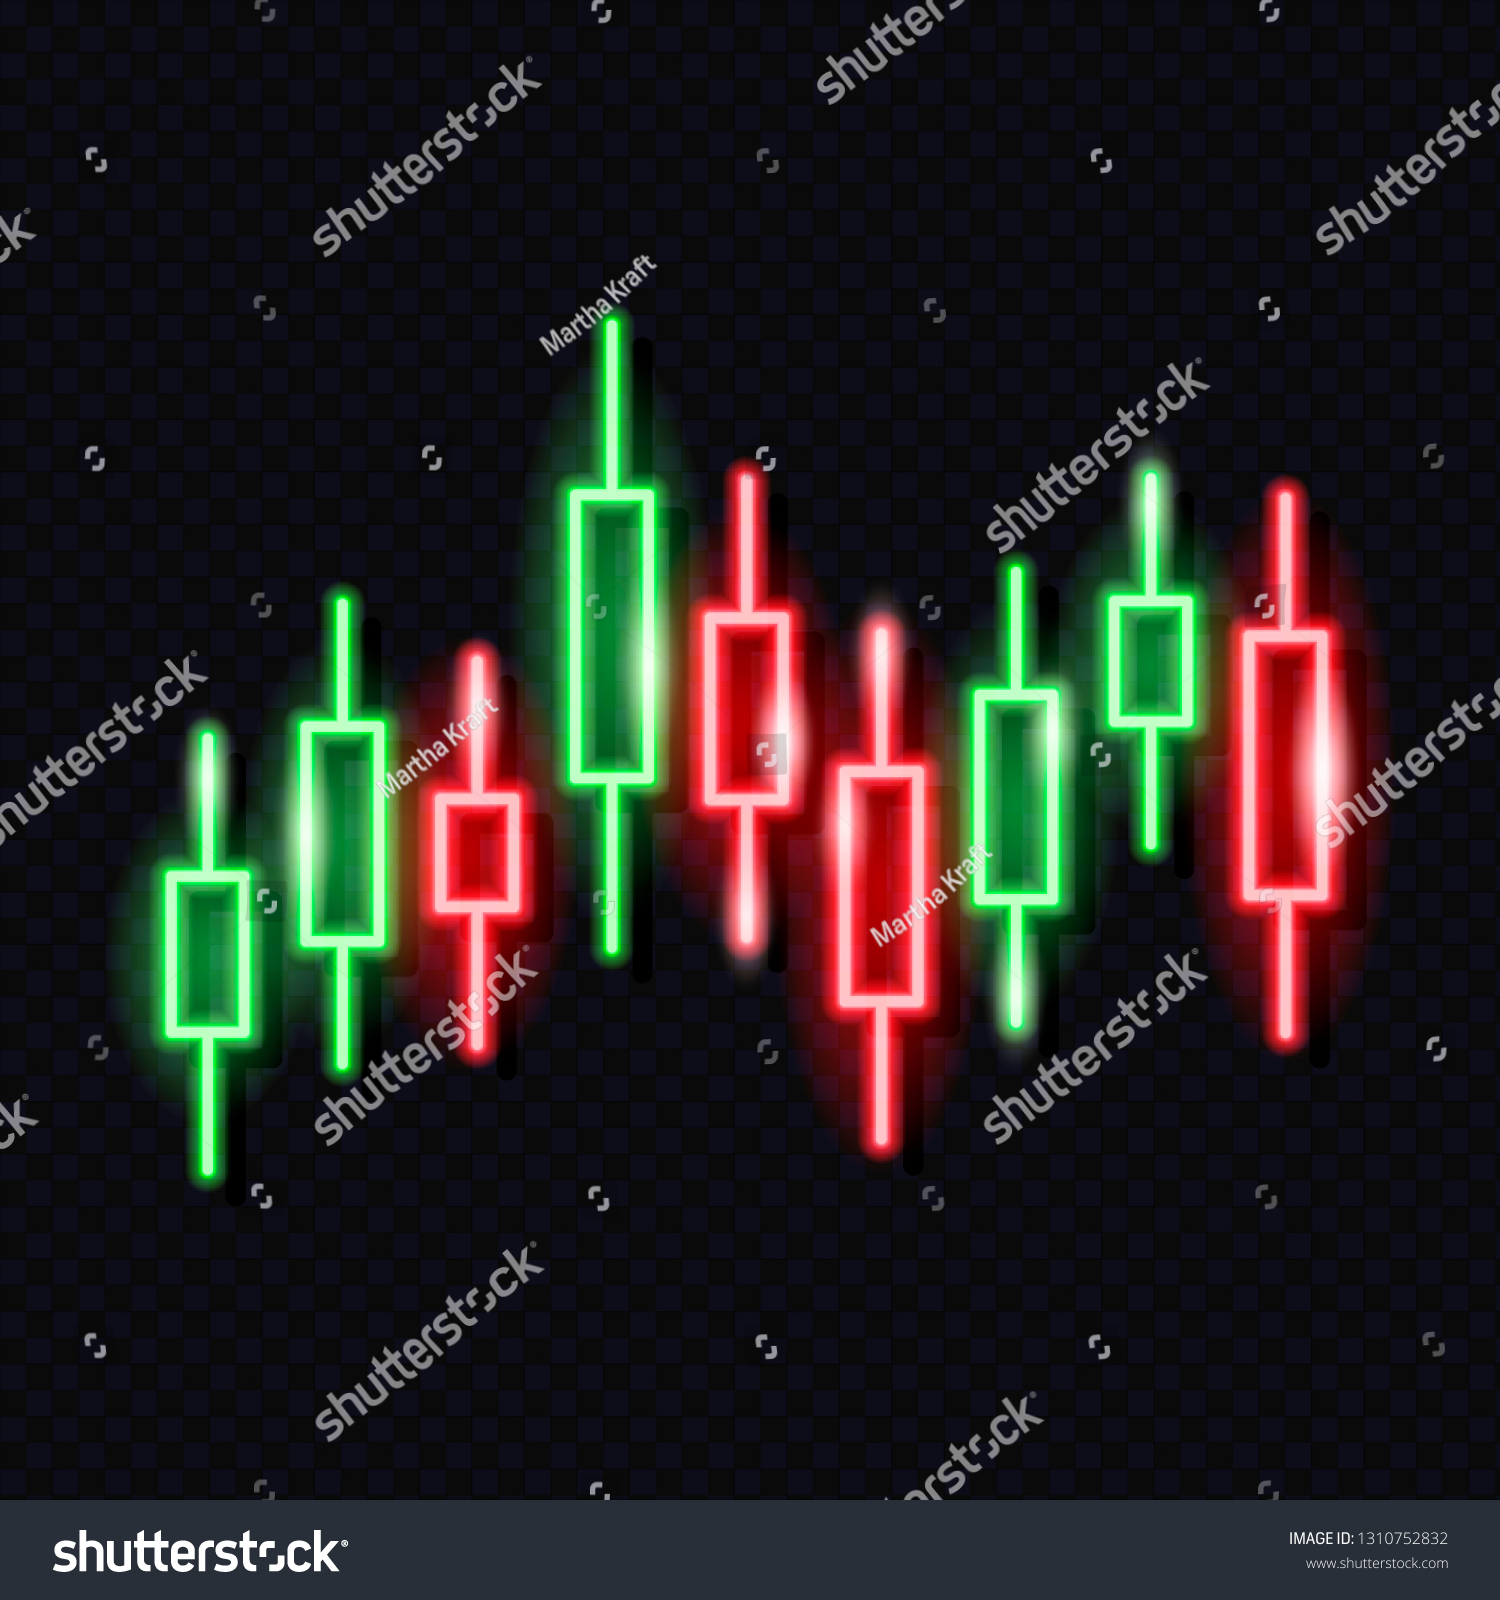 SVG of Neon japanese candlestick chart isolated on dark background. Stock exchange market concept. Financial infographics. Design element for glowing signboard. Vector 10 EPS illustration. svg